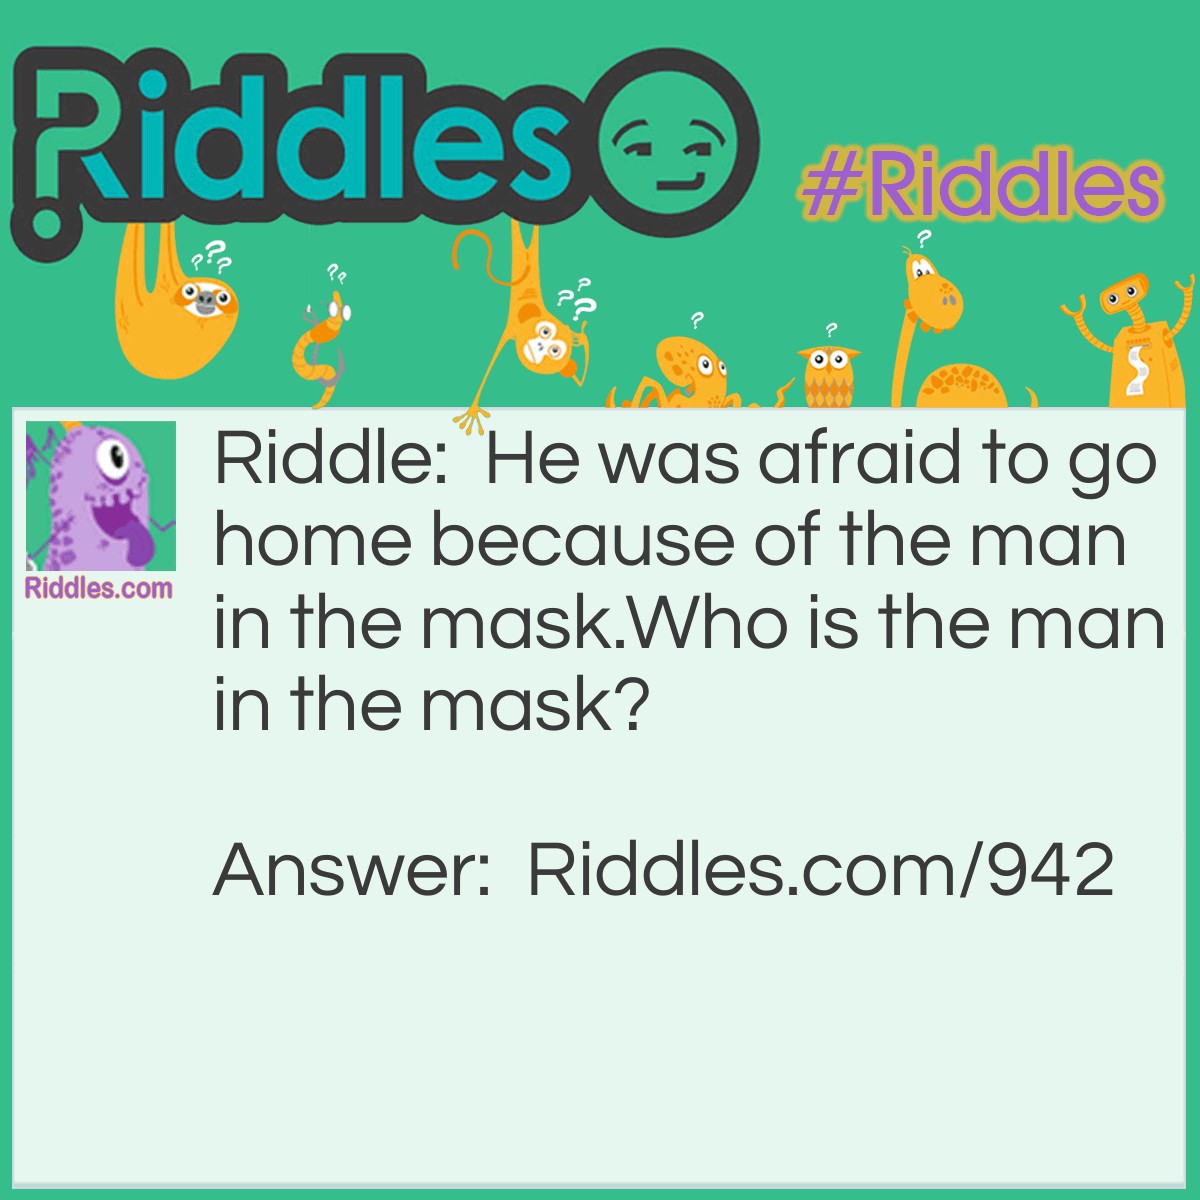 Riddle: He was afraid to go home because of the man in the mask.
Who is the man in the mask? Answer: The man in the mask is the catcher.